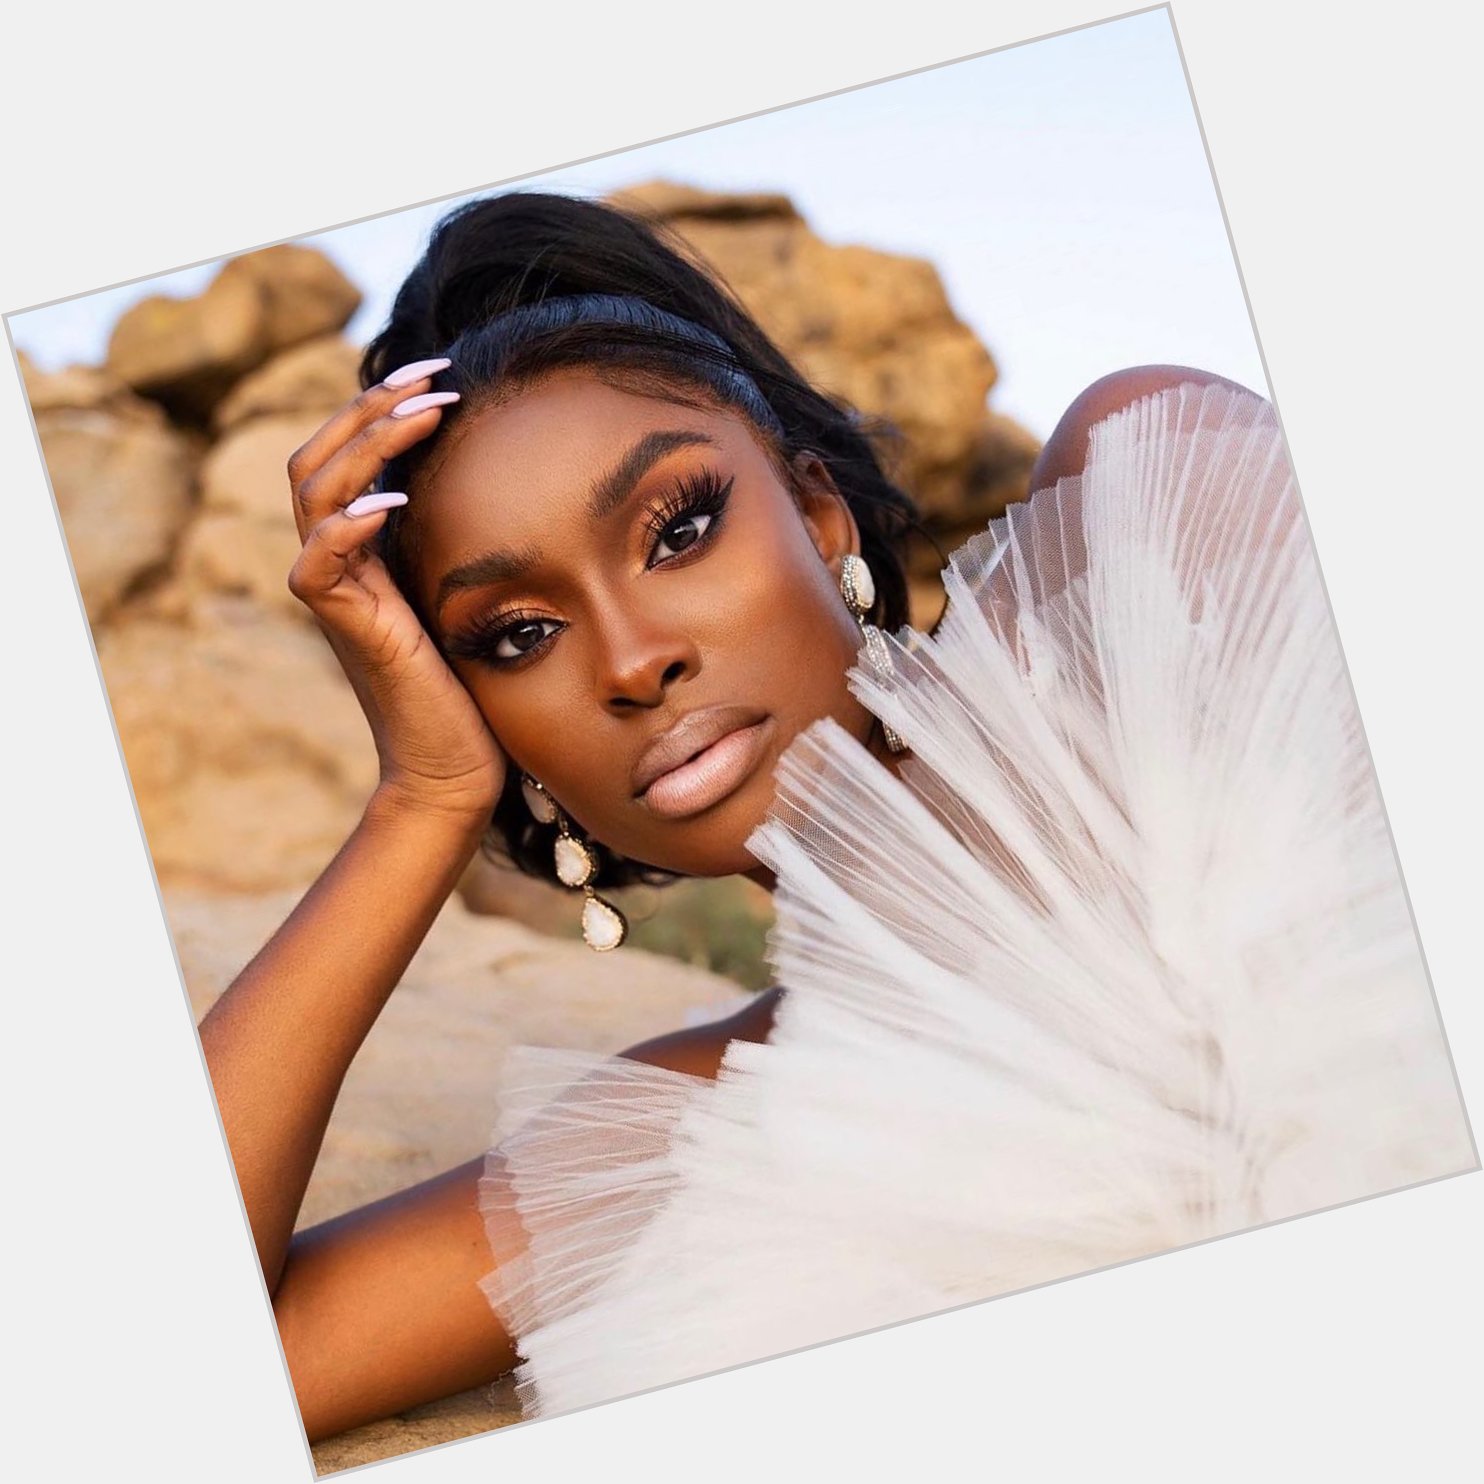 Happy 24th Birthday to the beautiful and talented Coco Jones 